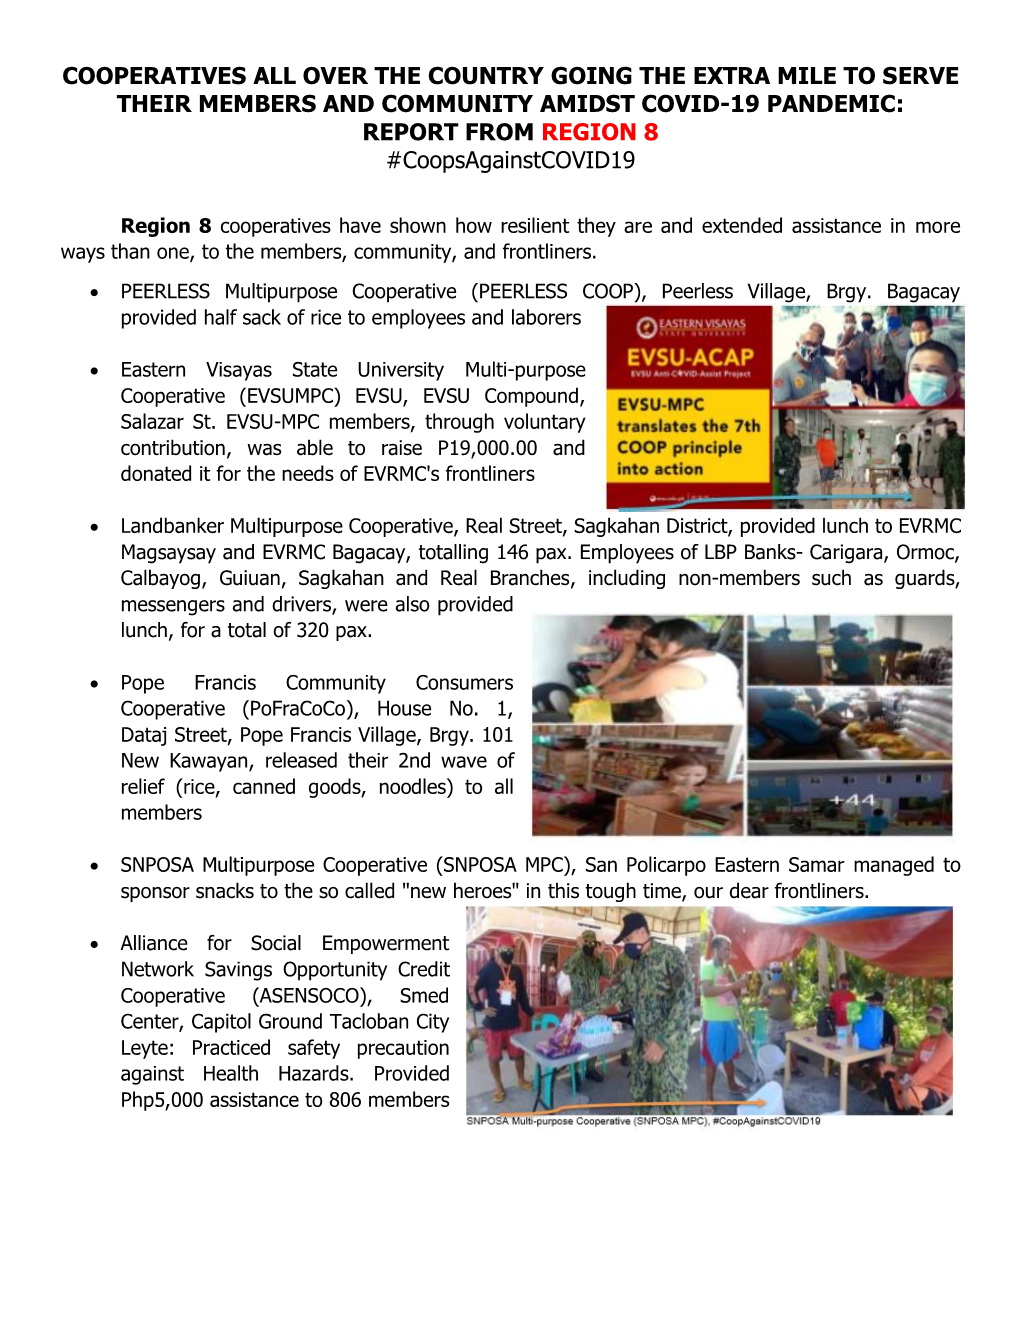 COOPERATIVES ALL OVER the COUNTRY GOING the EXTRA MILE to SERVE THEIR MEMBERS and COMMUNITY AMIDST COVID-19 PANDEMIC: REPORT from REGION 8 #Coopsagainstcovid19